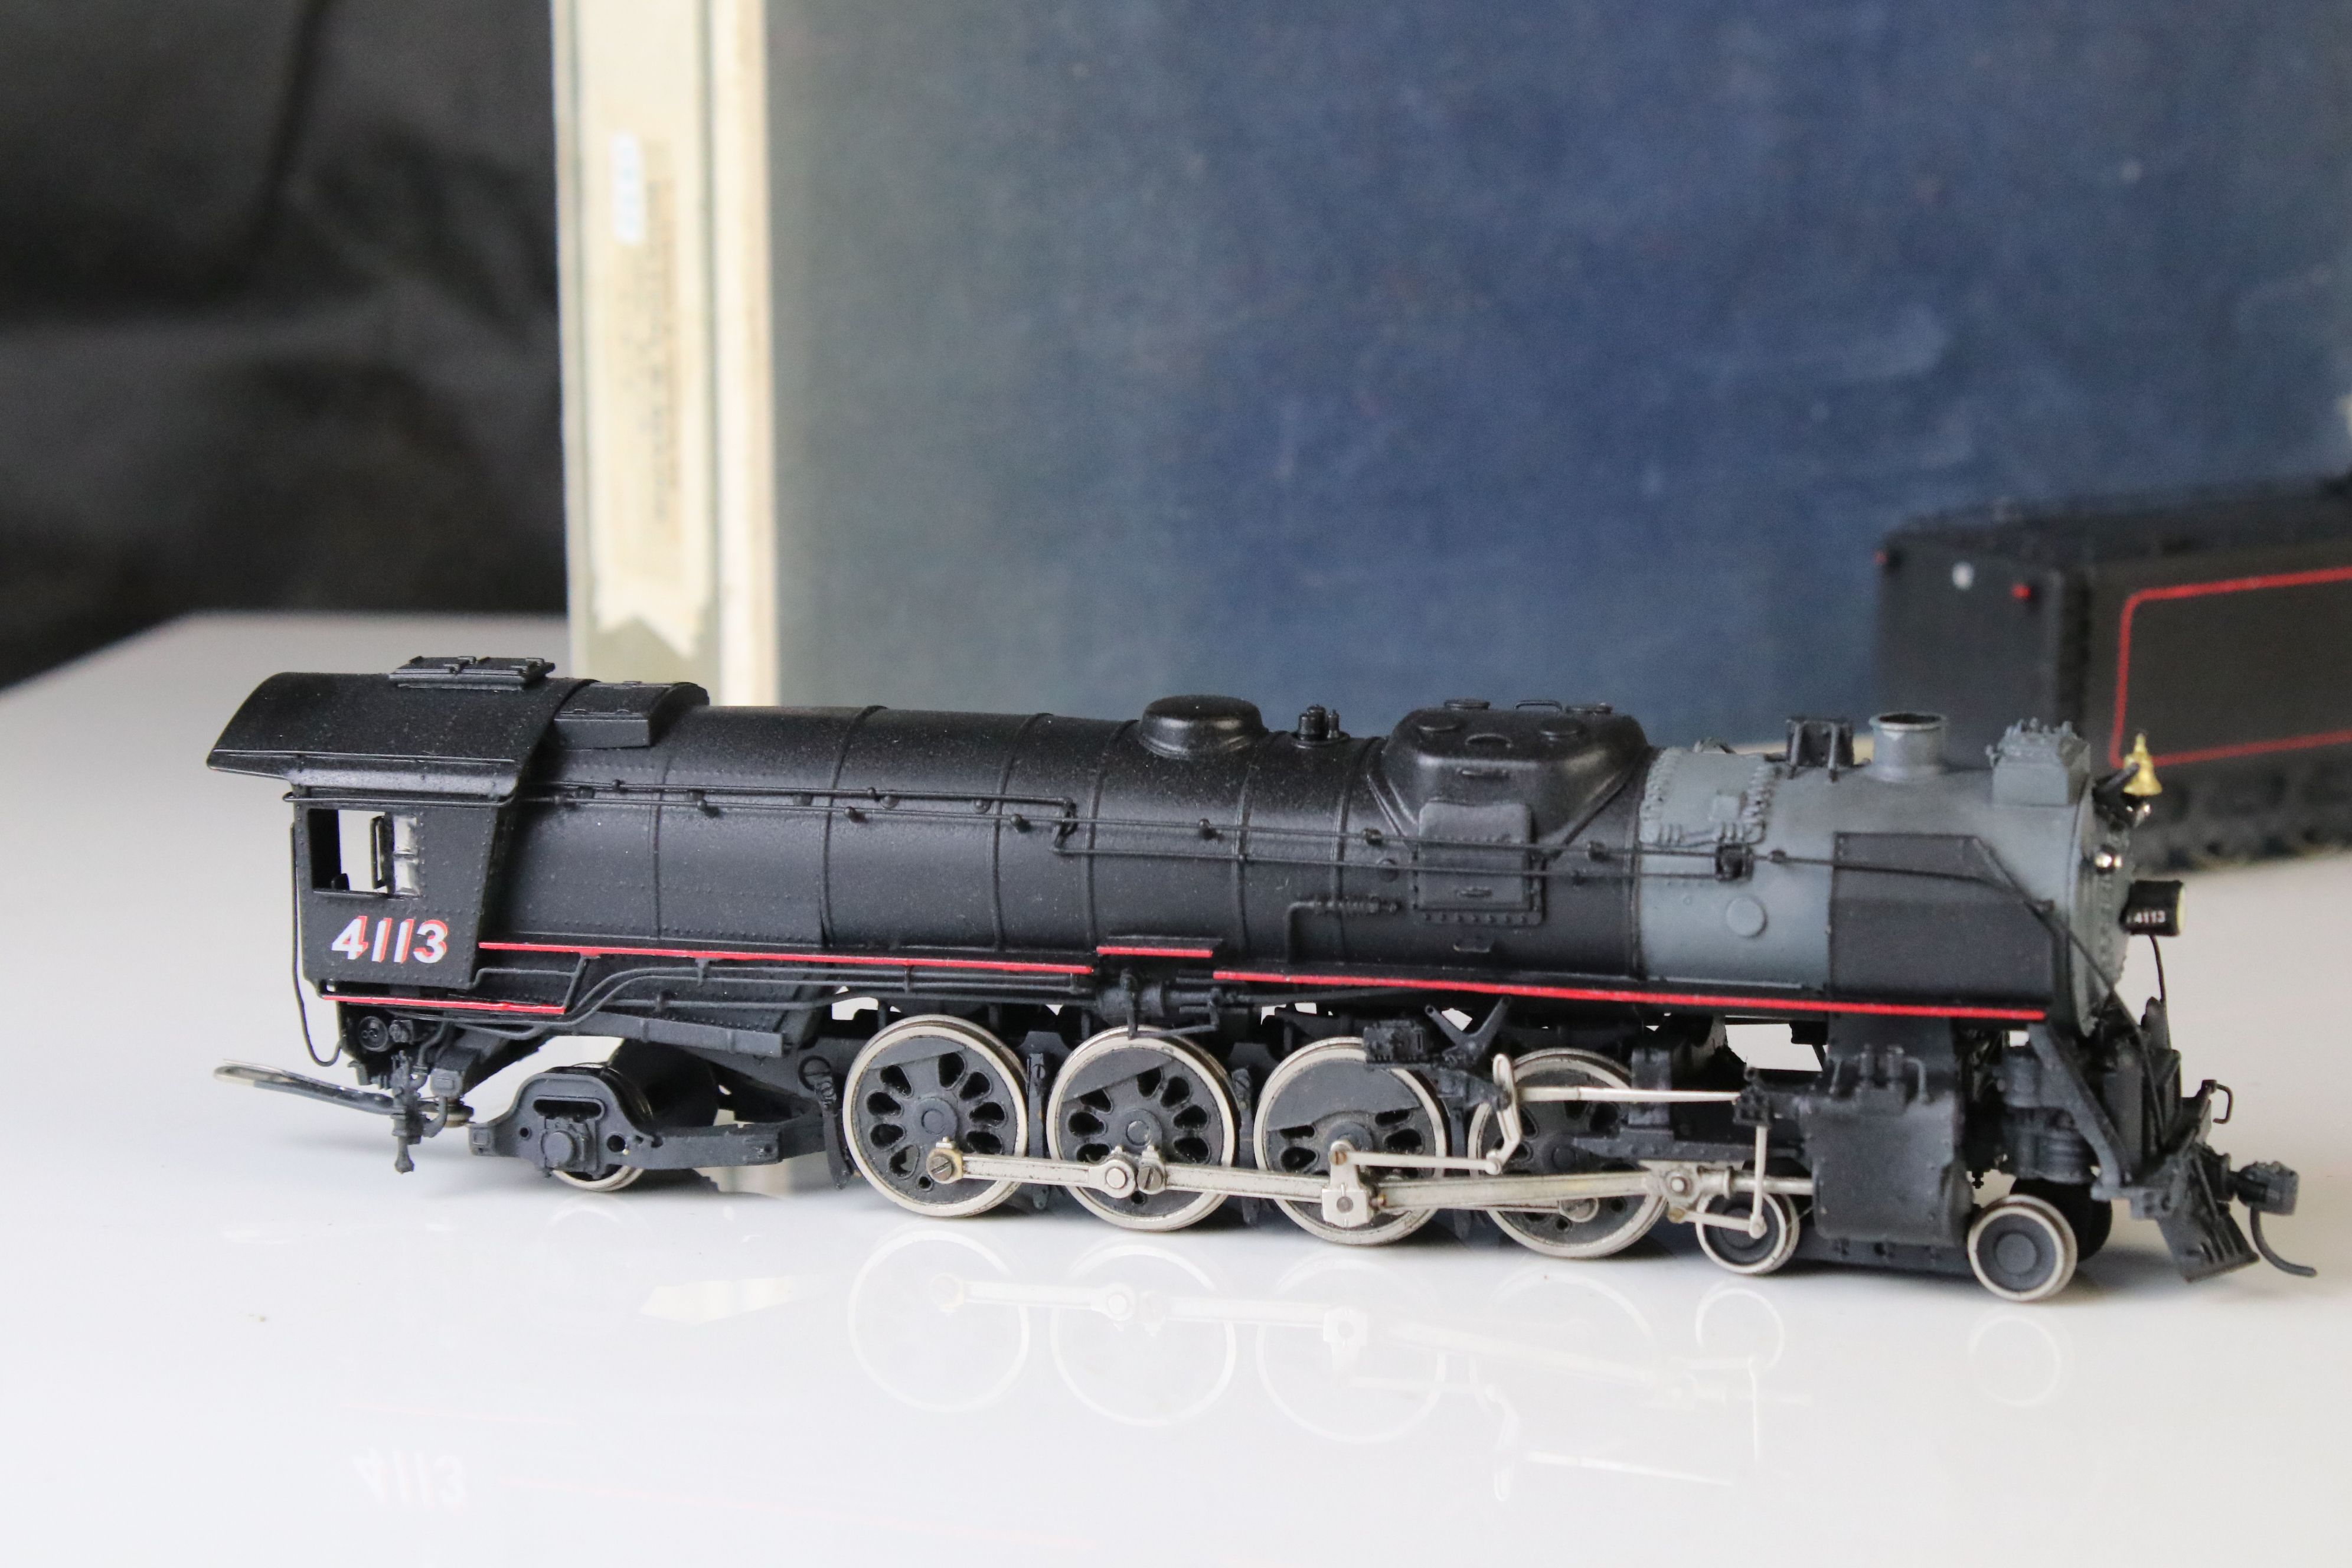 Boxed Olympia HO gauge Boston & Maine Class R1-d 4-8-2 4113 locomotive & tender, painted, - Image 3 of 14